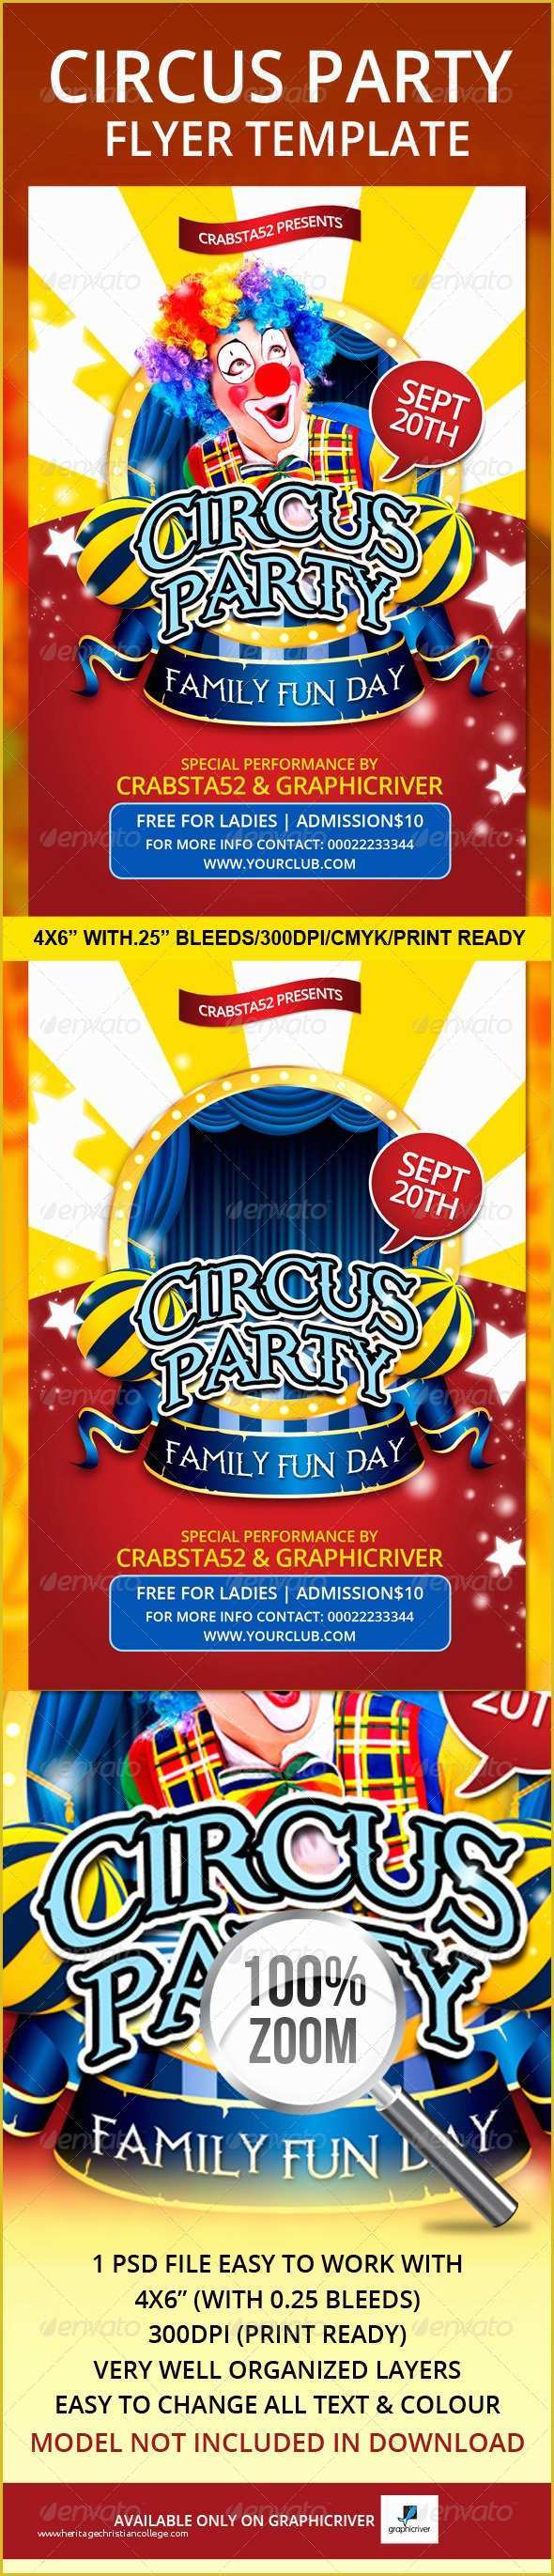 Circus Poster Template Free Download Of Circus Party Flyer Template by Crabsta52